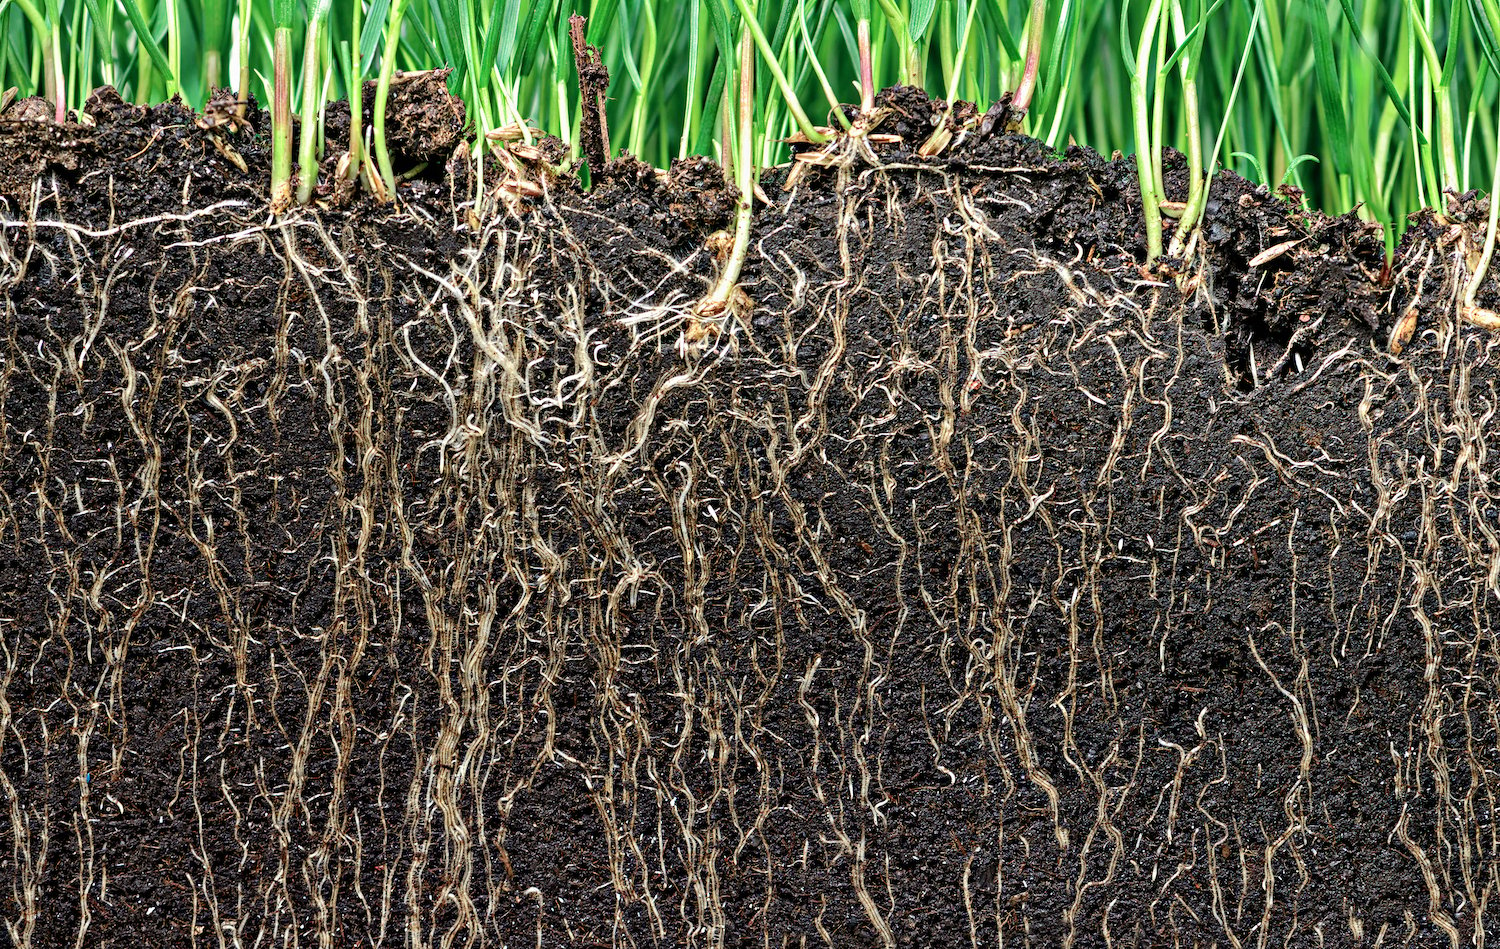 Healthy soil and lawn roots